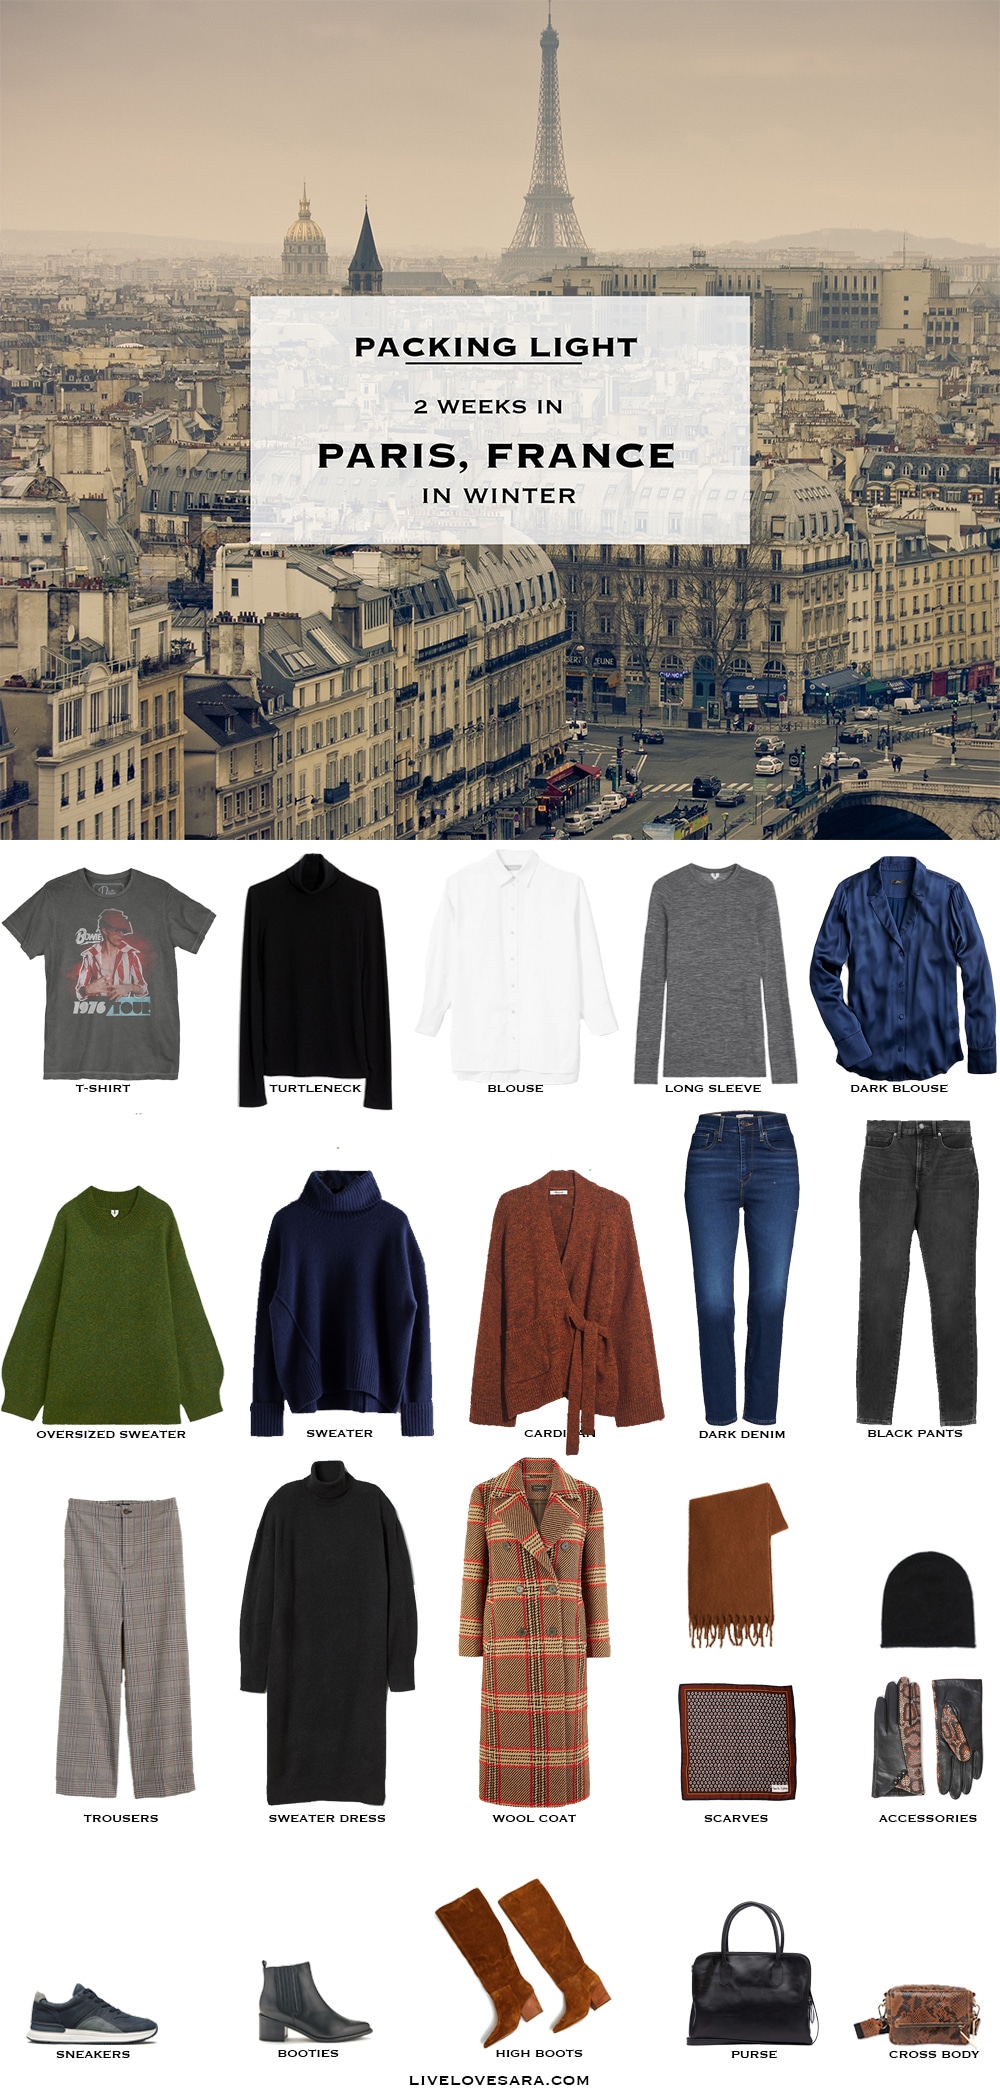 What to pack for Paris packing list | Paris Outfit Ideas | What to Wear in Paris | France Packing list | Winter Packing List | What to Wear in France | France Outfits Ideas | Packing Light | Capsule Wardrobe | travel wardrobe | Fall packing list | travel capsule | livelovesara